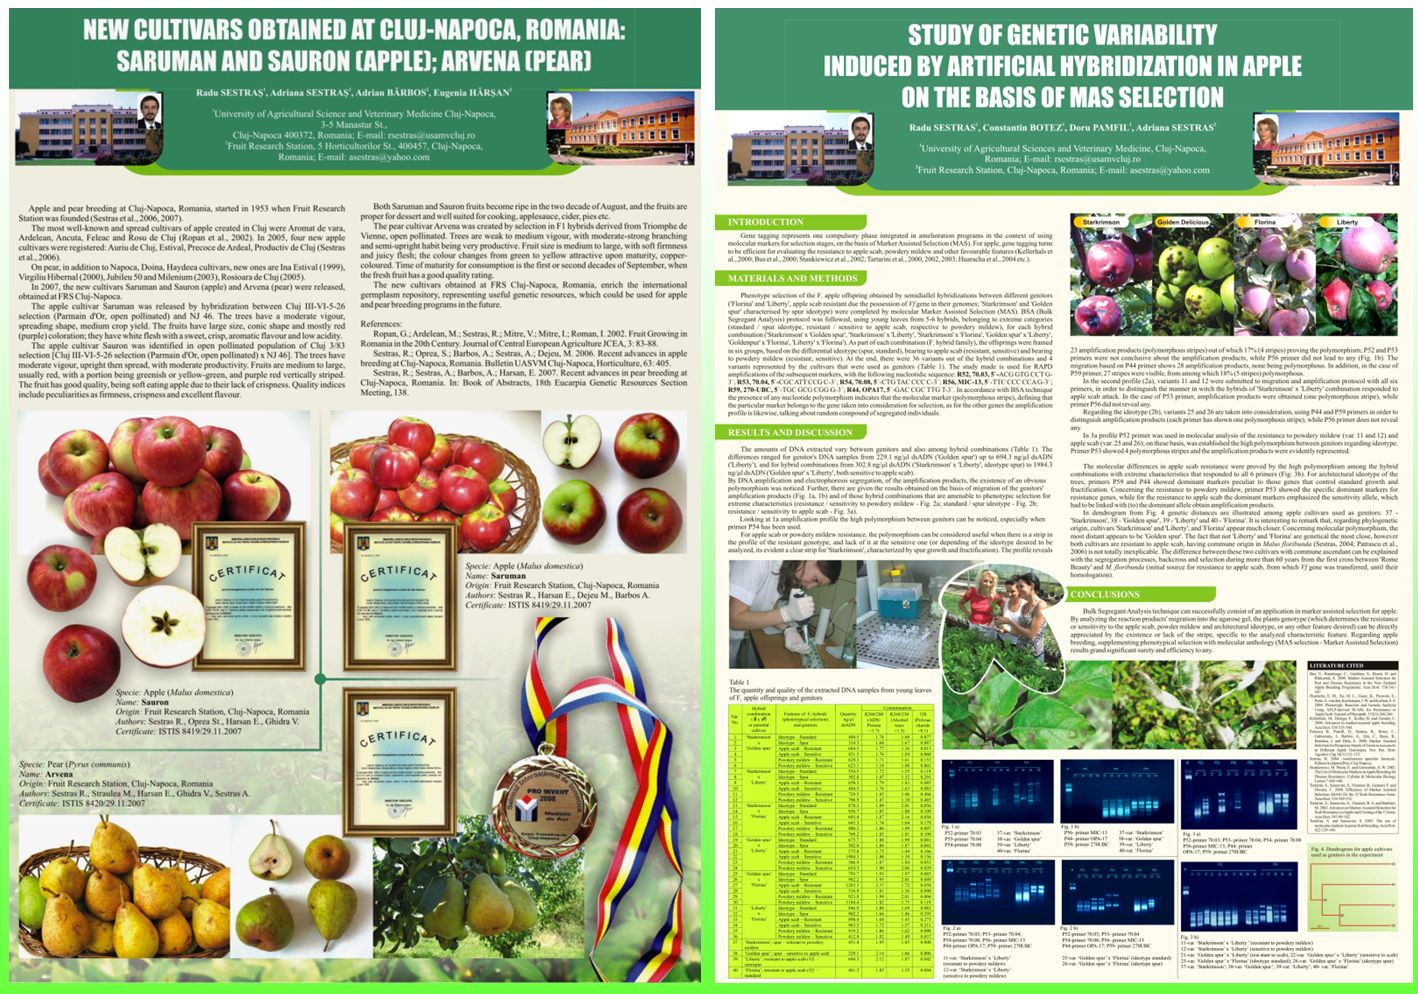 Apple and pear breeding in Cluj-Napoca. Posters new cultivars and research